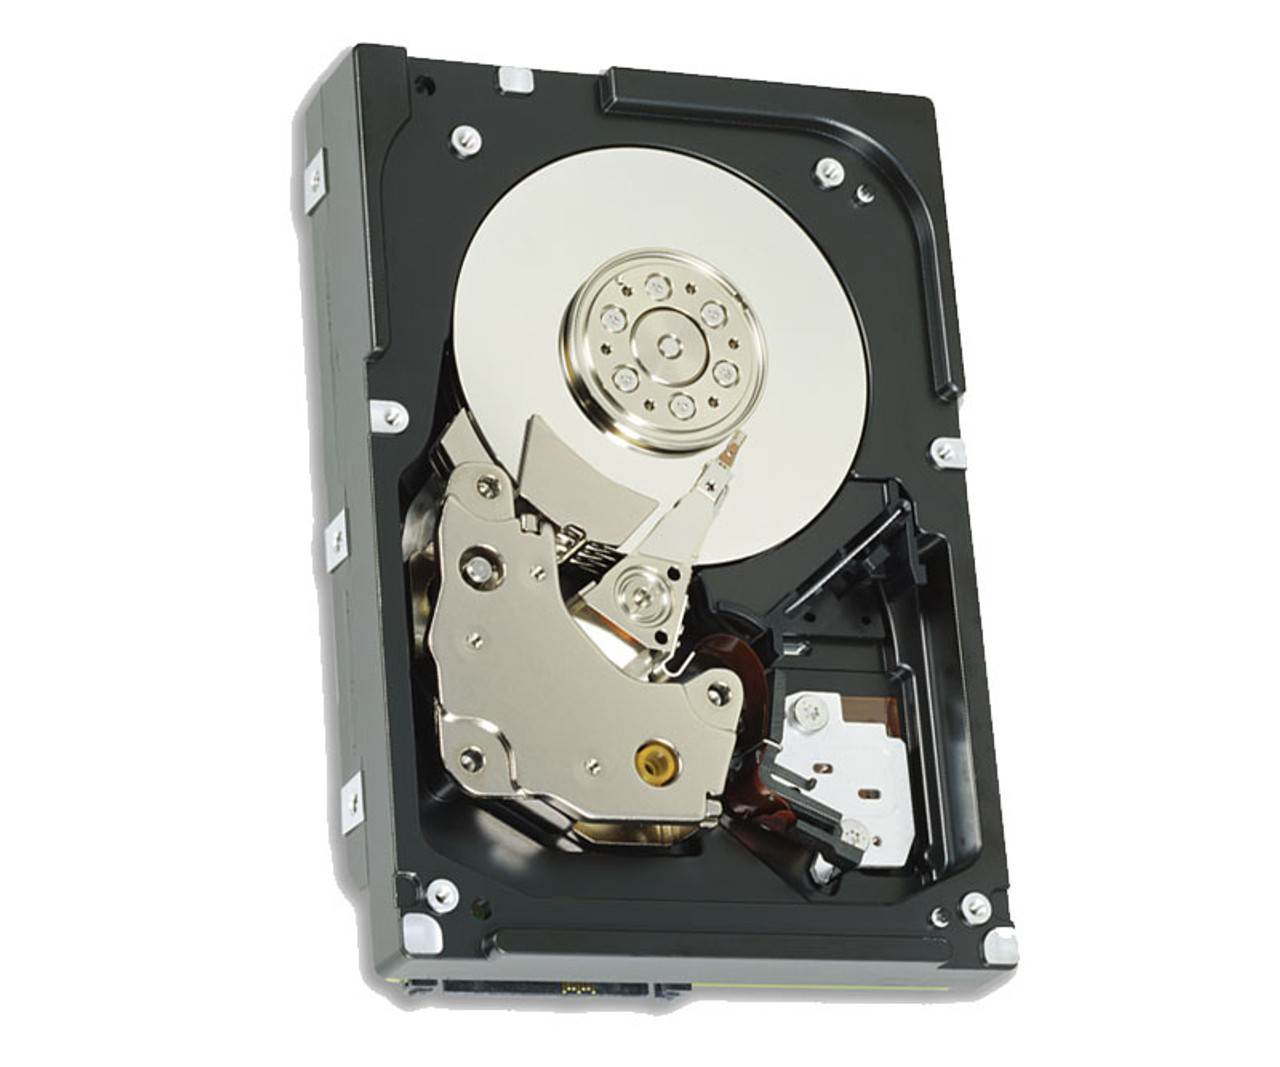 E20S4P4U - Toshiba E20S4P4U 450 GB Internal Hard Drive - 4 Pack - SAS - 15000 rpm - Hot Swappable